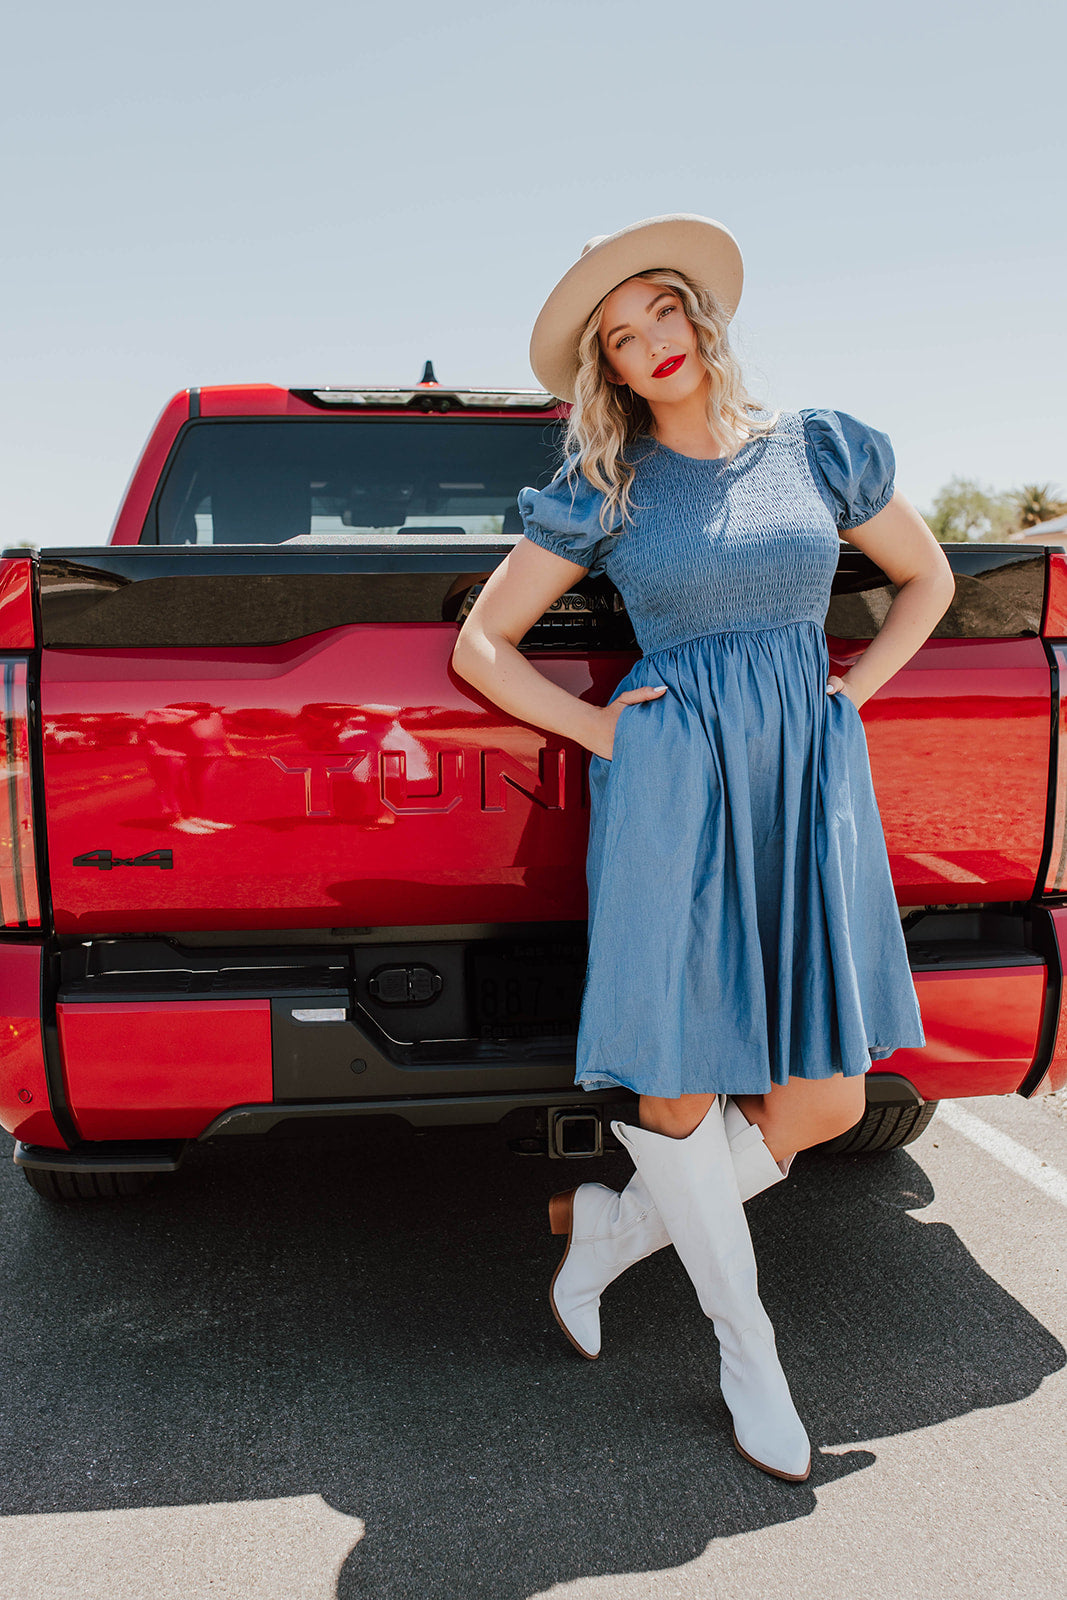 THE KENNEDY SMOCKED DRESS IN CHAMBRAY BY PINK DESERT